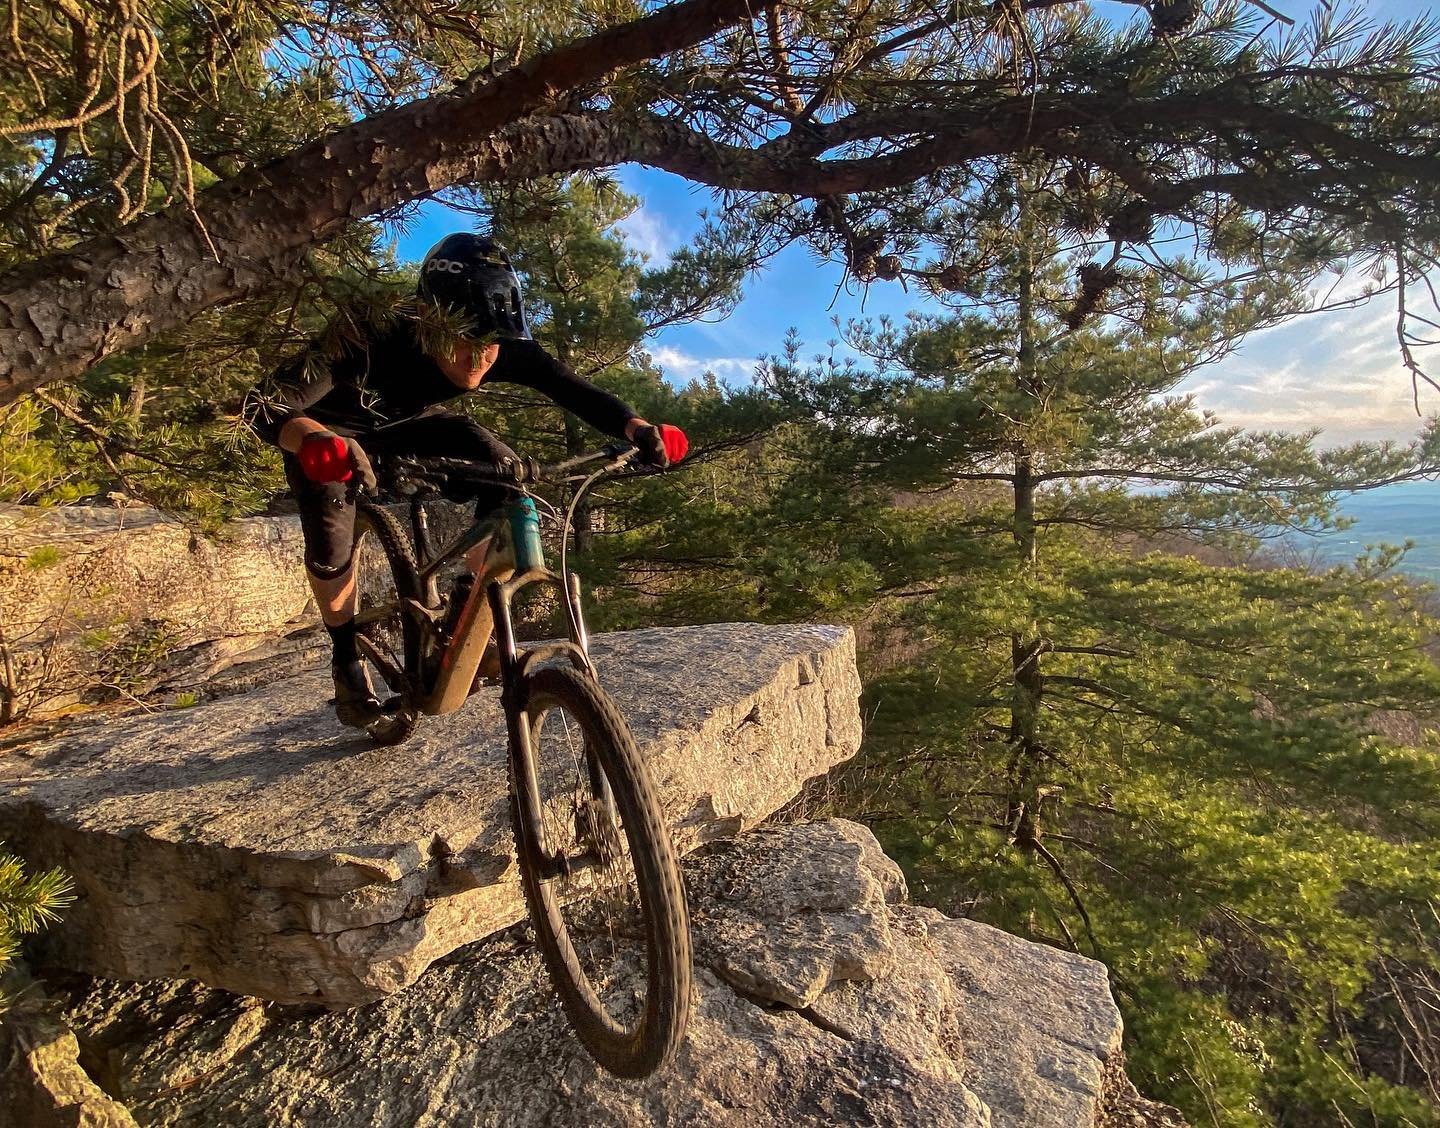 SBC&rsquo;s series of summer full moon rides will kick off with the Bird Knob loop. We will be meeting at the Wildflower Trailhead at 7pm next Thursday, May 23rd. This loop has some of the area&rsquo;s best technical riding and views, just a 30 minut